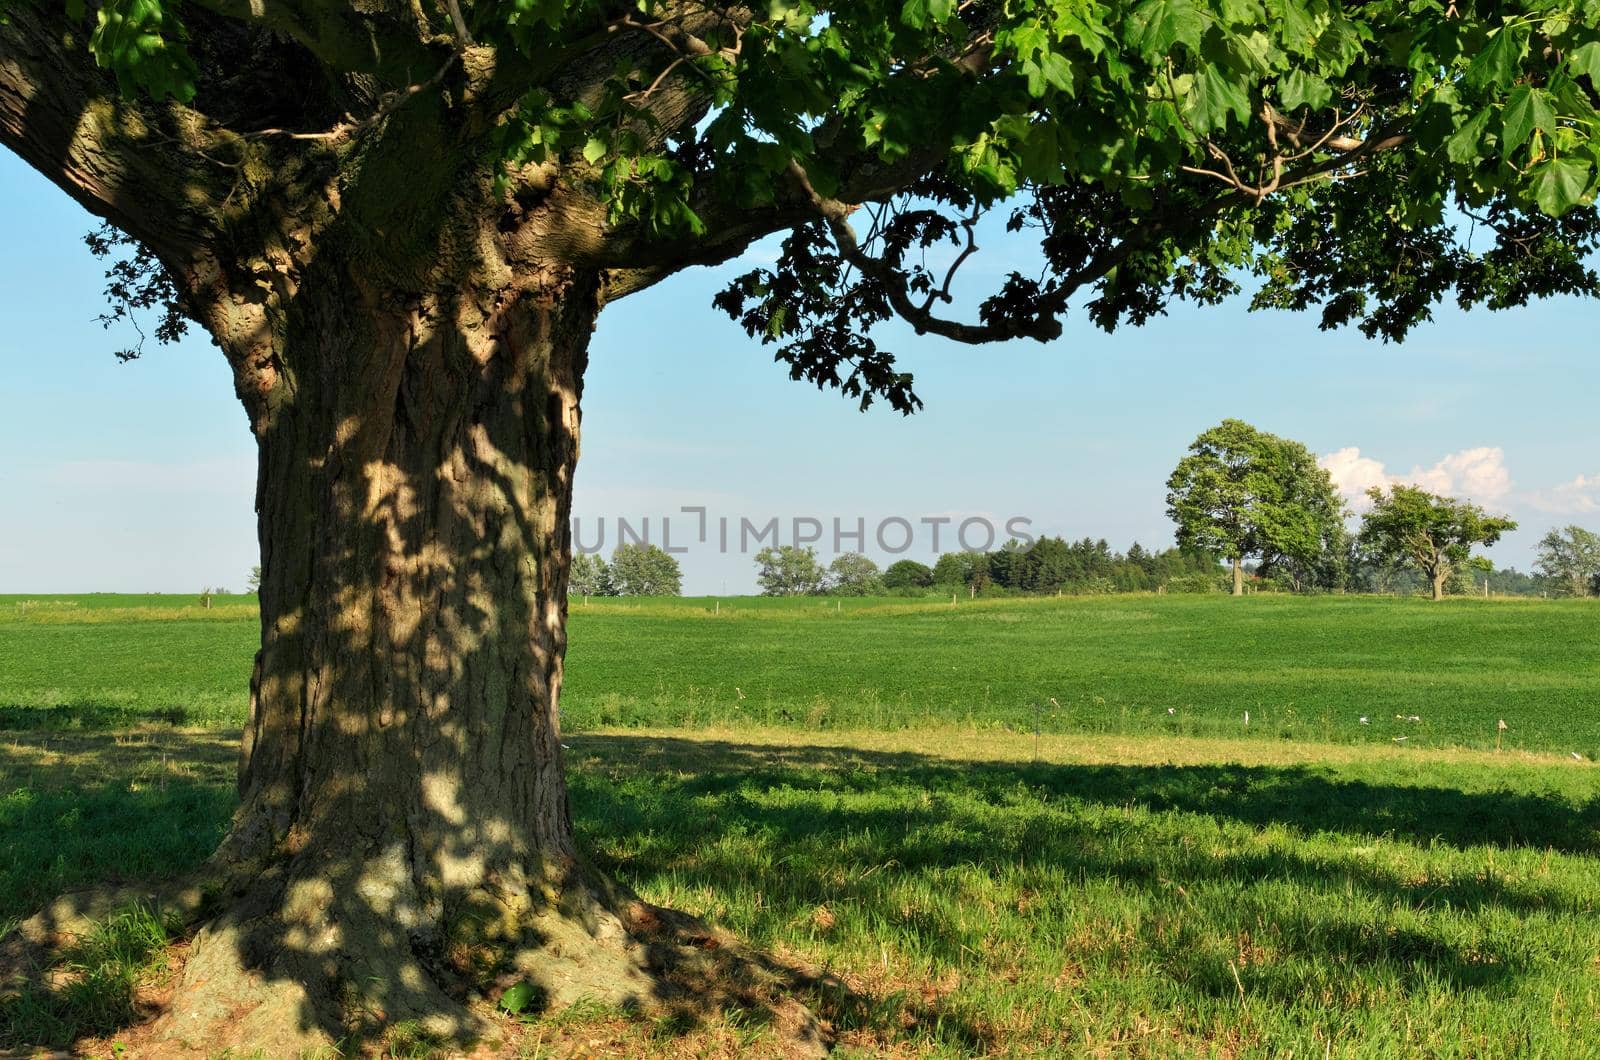 Idyllic Summer Scene at a Farm with Giant Maple Tree and Green Pastures on a Sunny Day. High quality photo